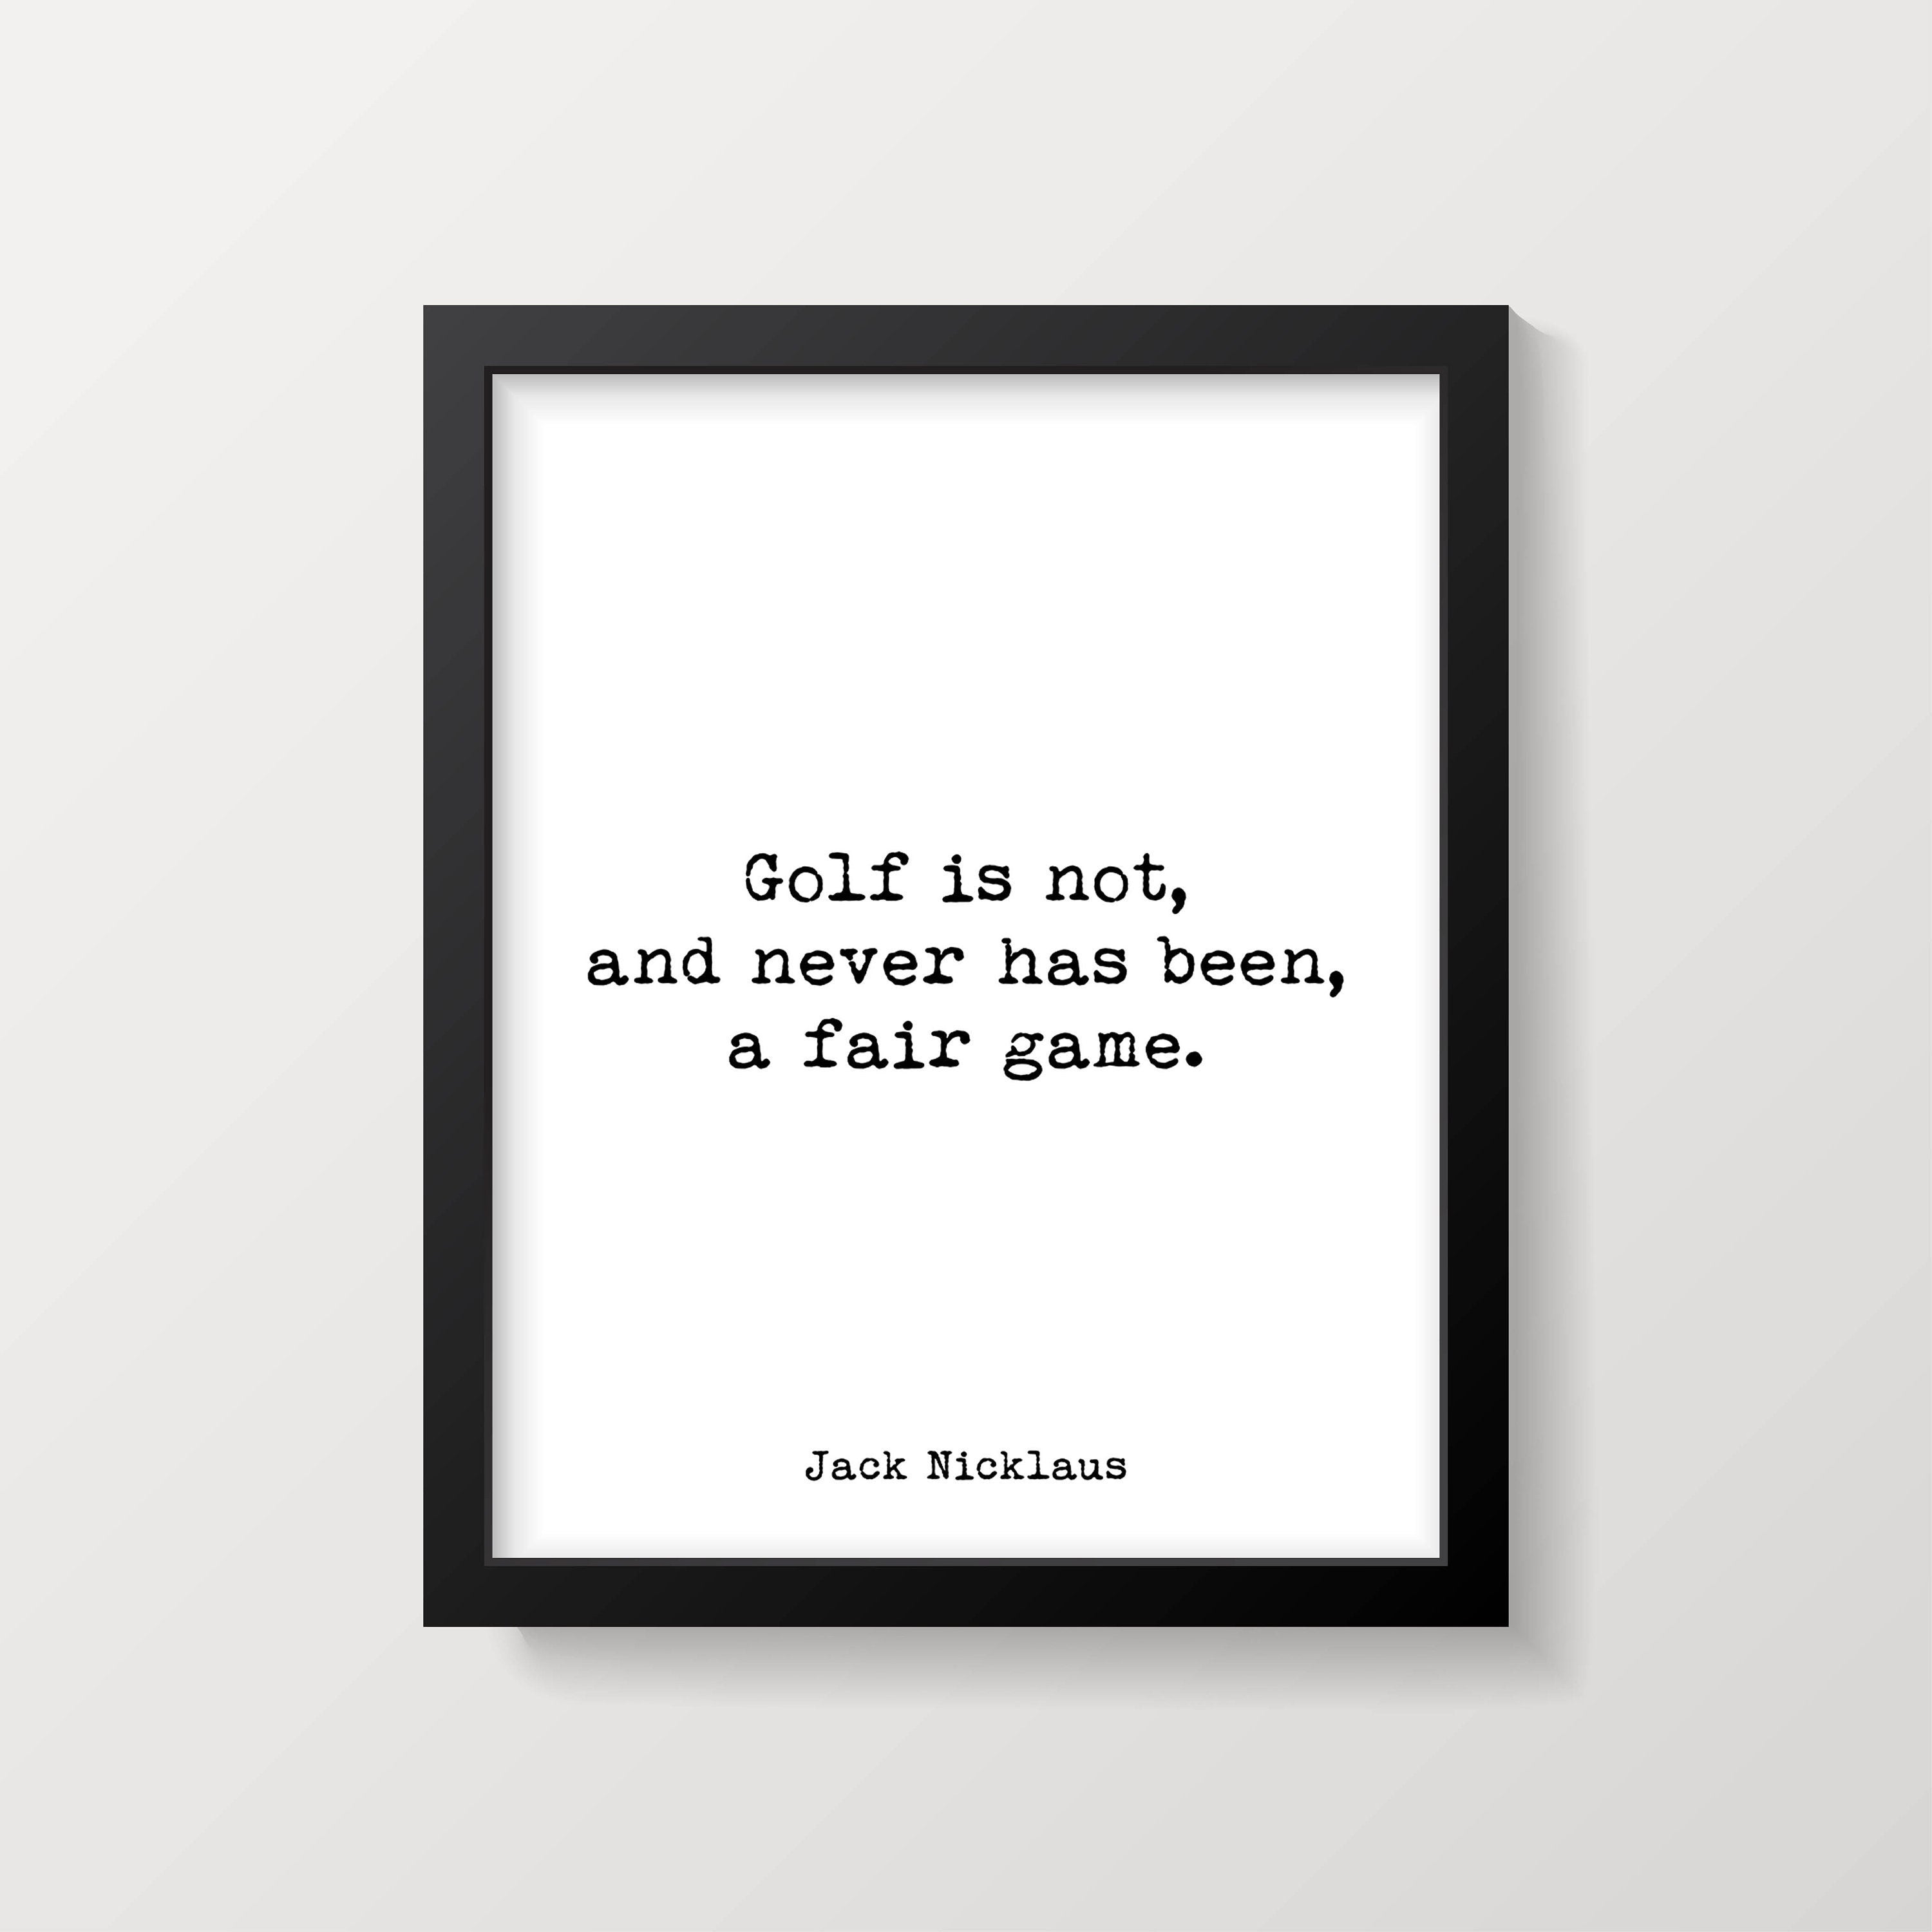 Jack Nicklaus Golf Quote Art Print, Golf is not